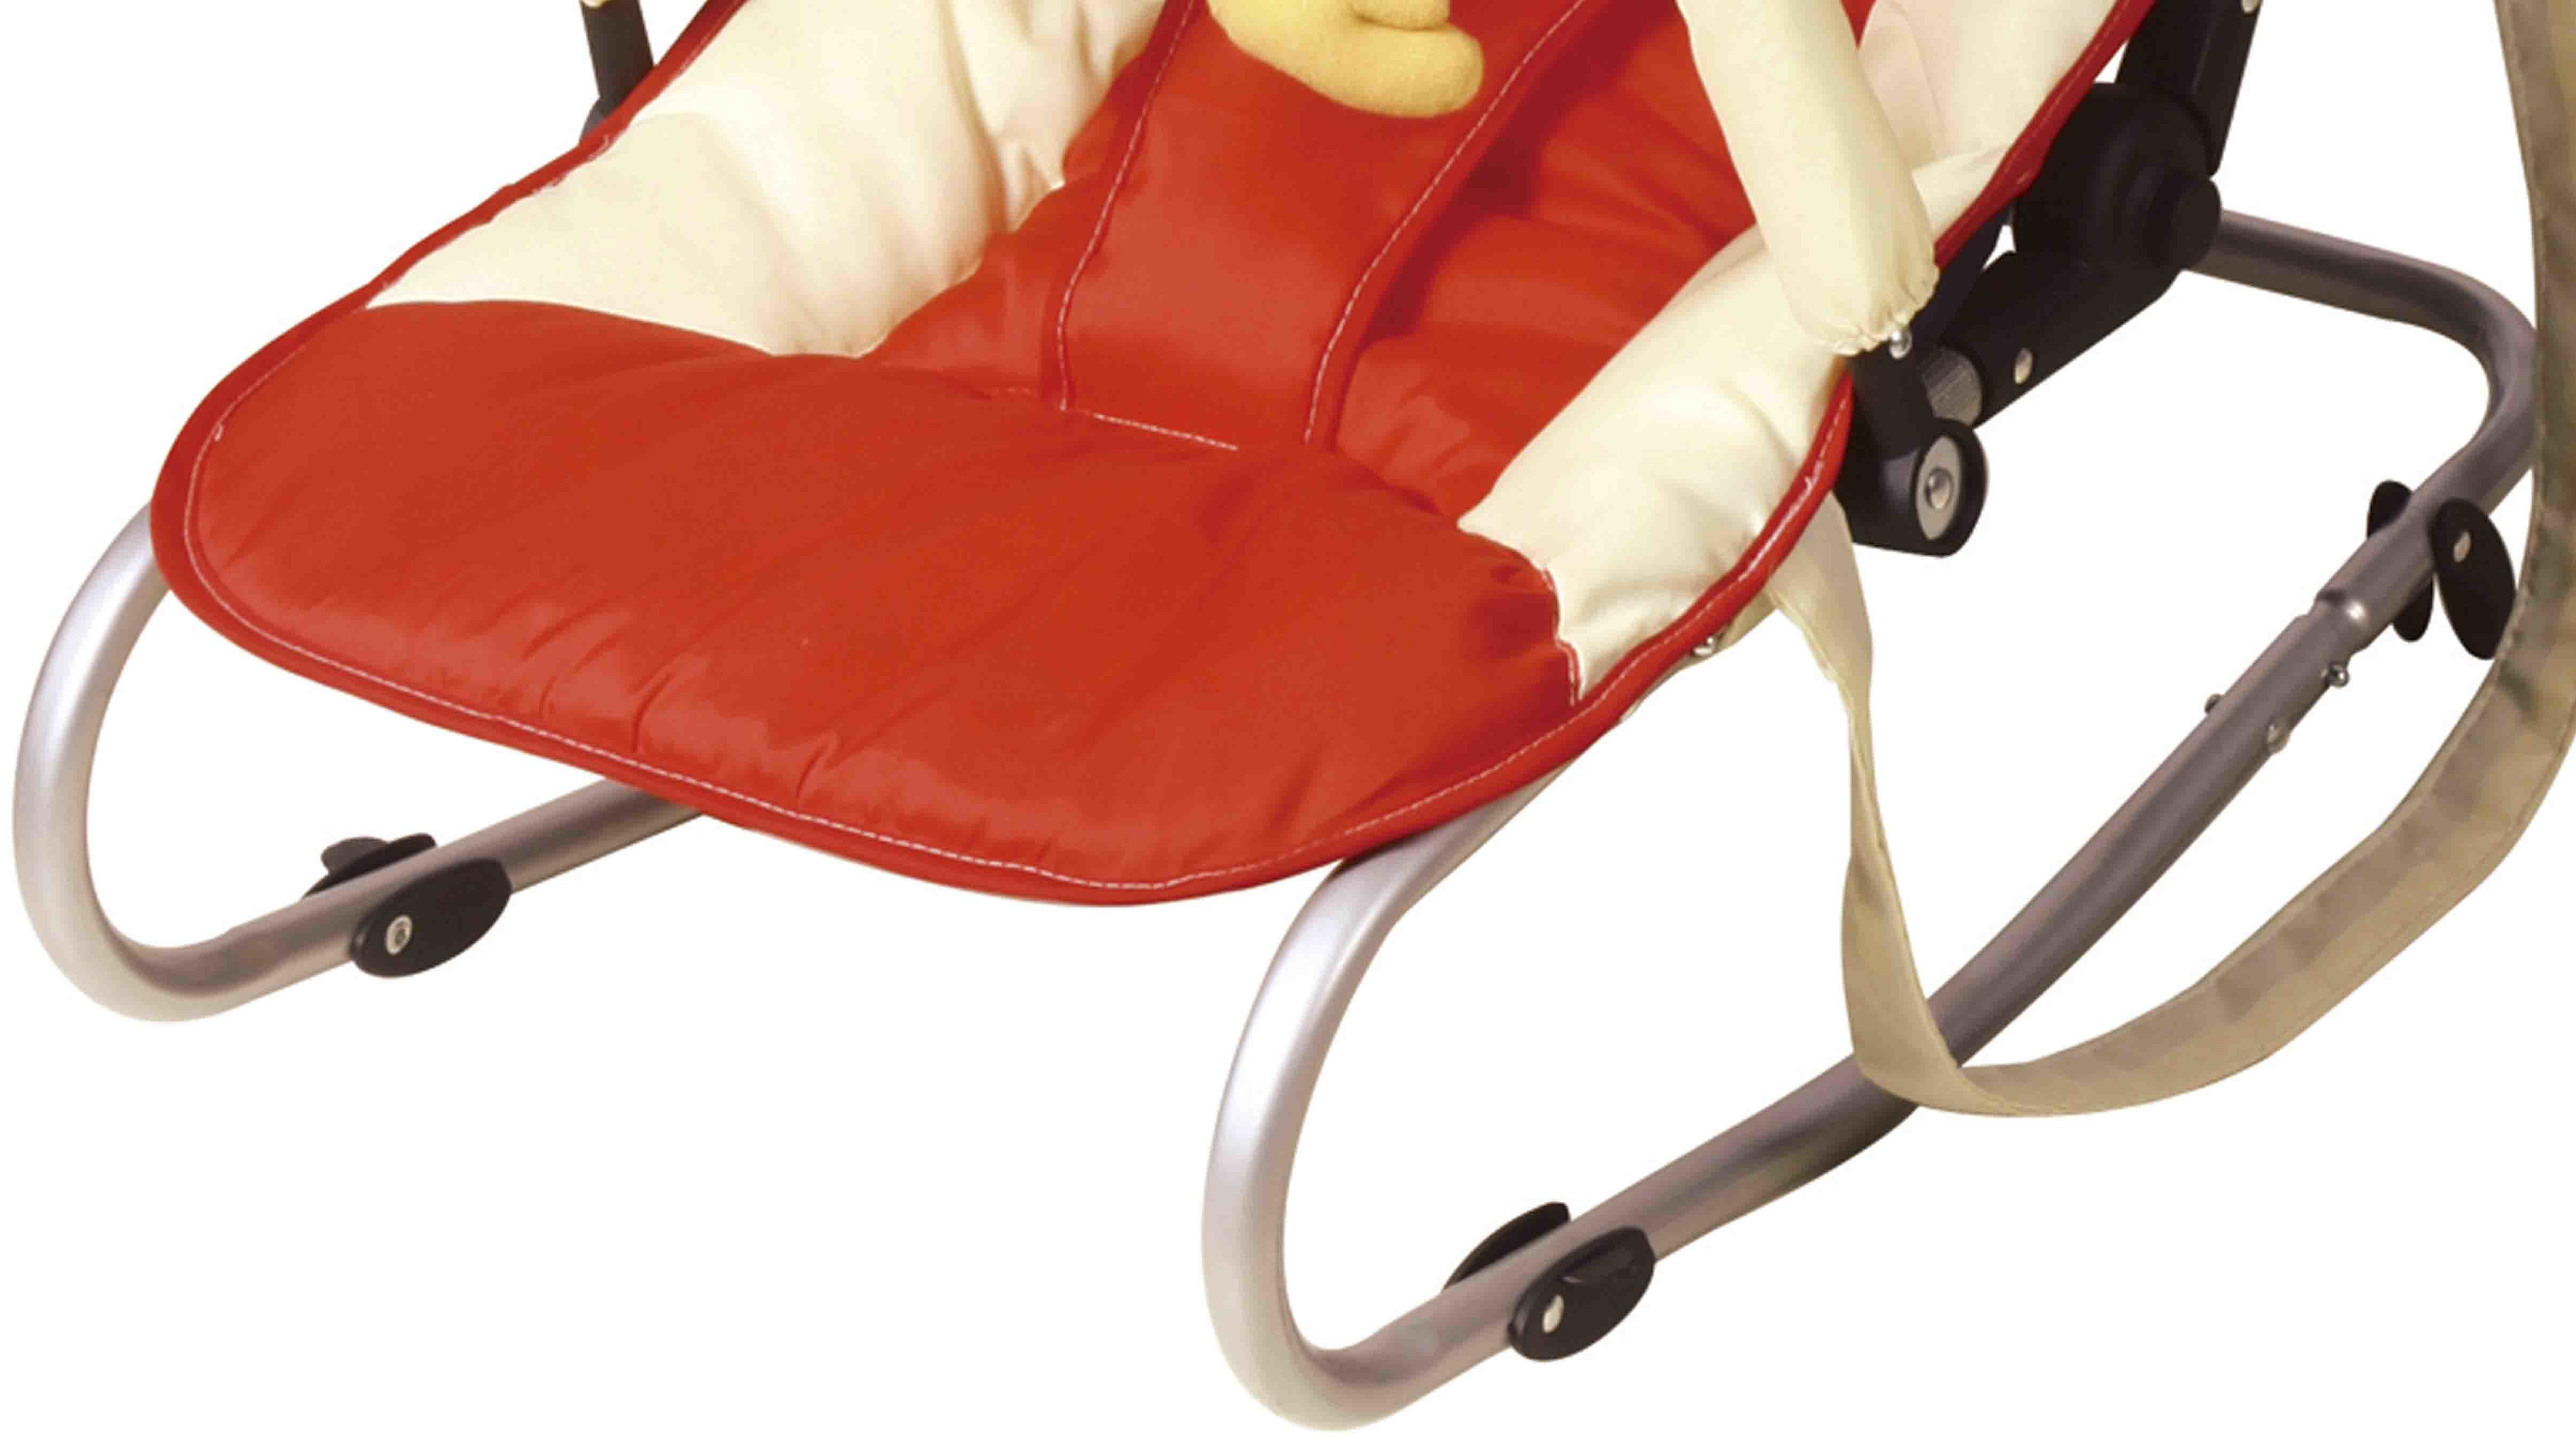 New born to toddler baby rocking chair with canopy and hanging toys 335A-3